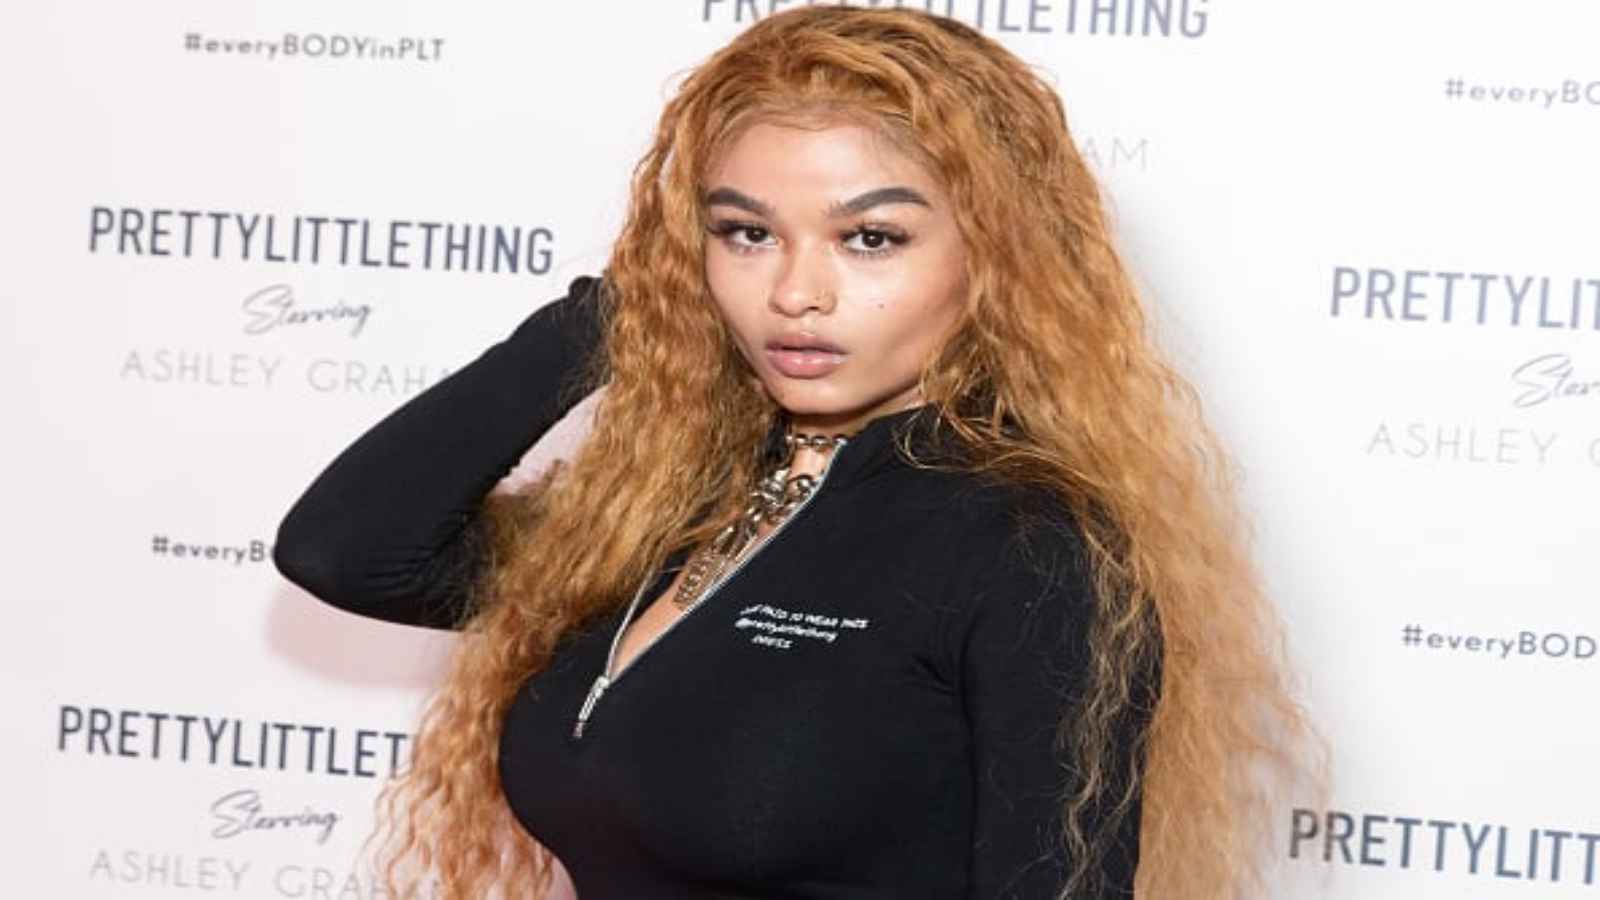 India Love Biography: Age, Height, Birthday, Family, Net Worth